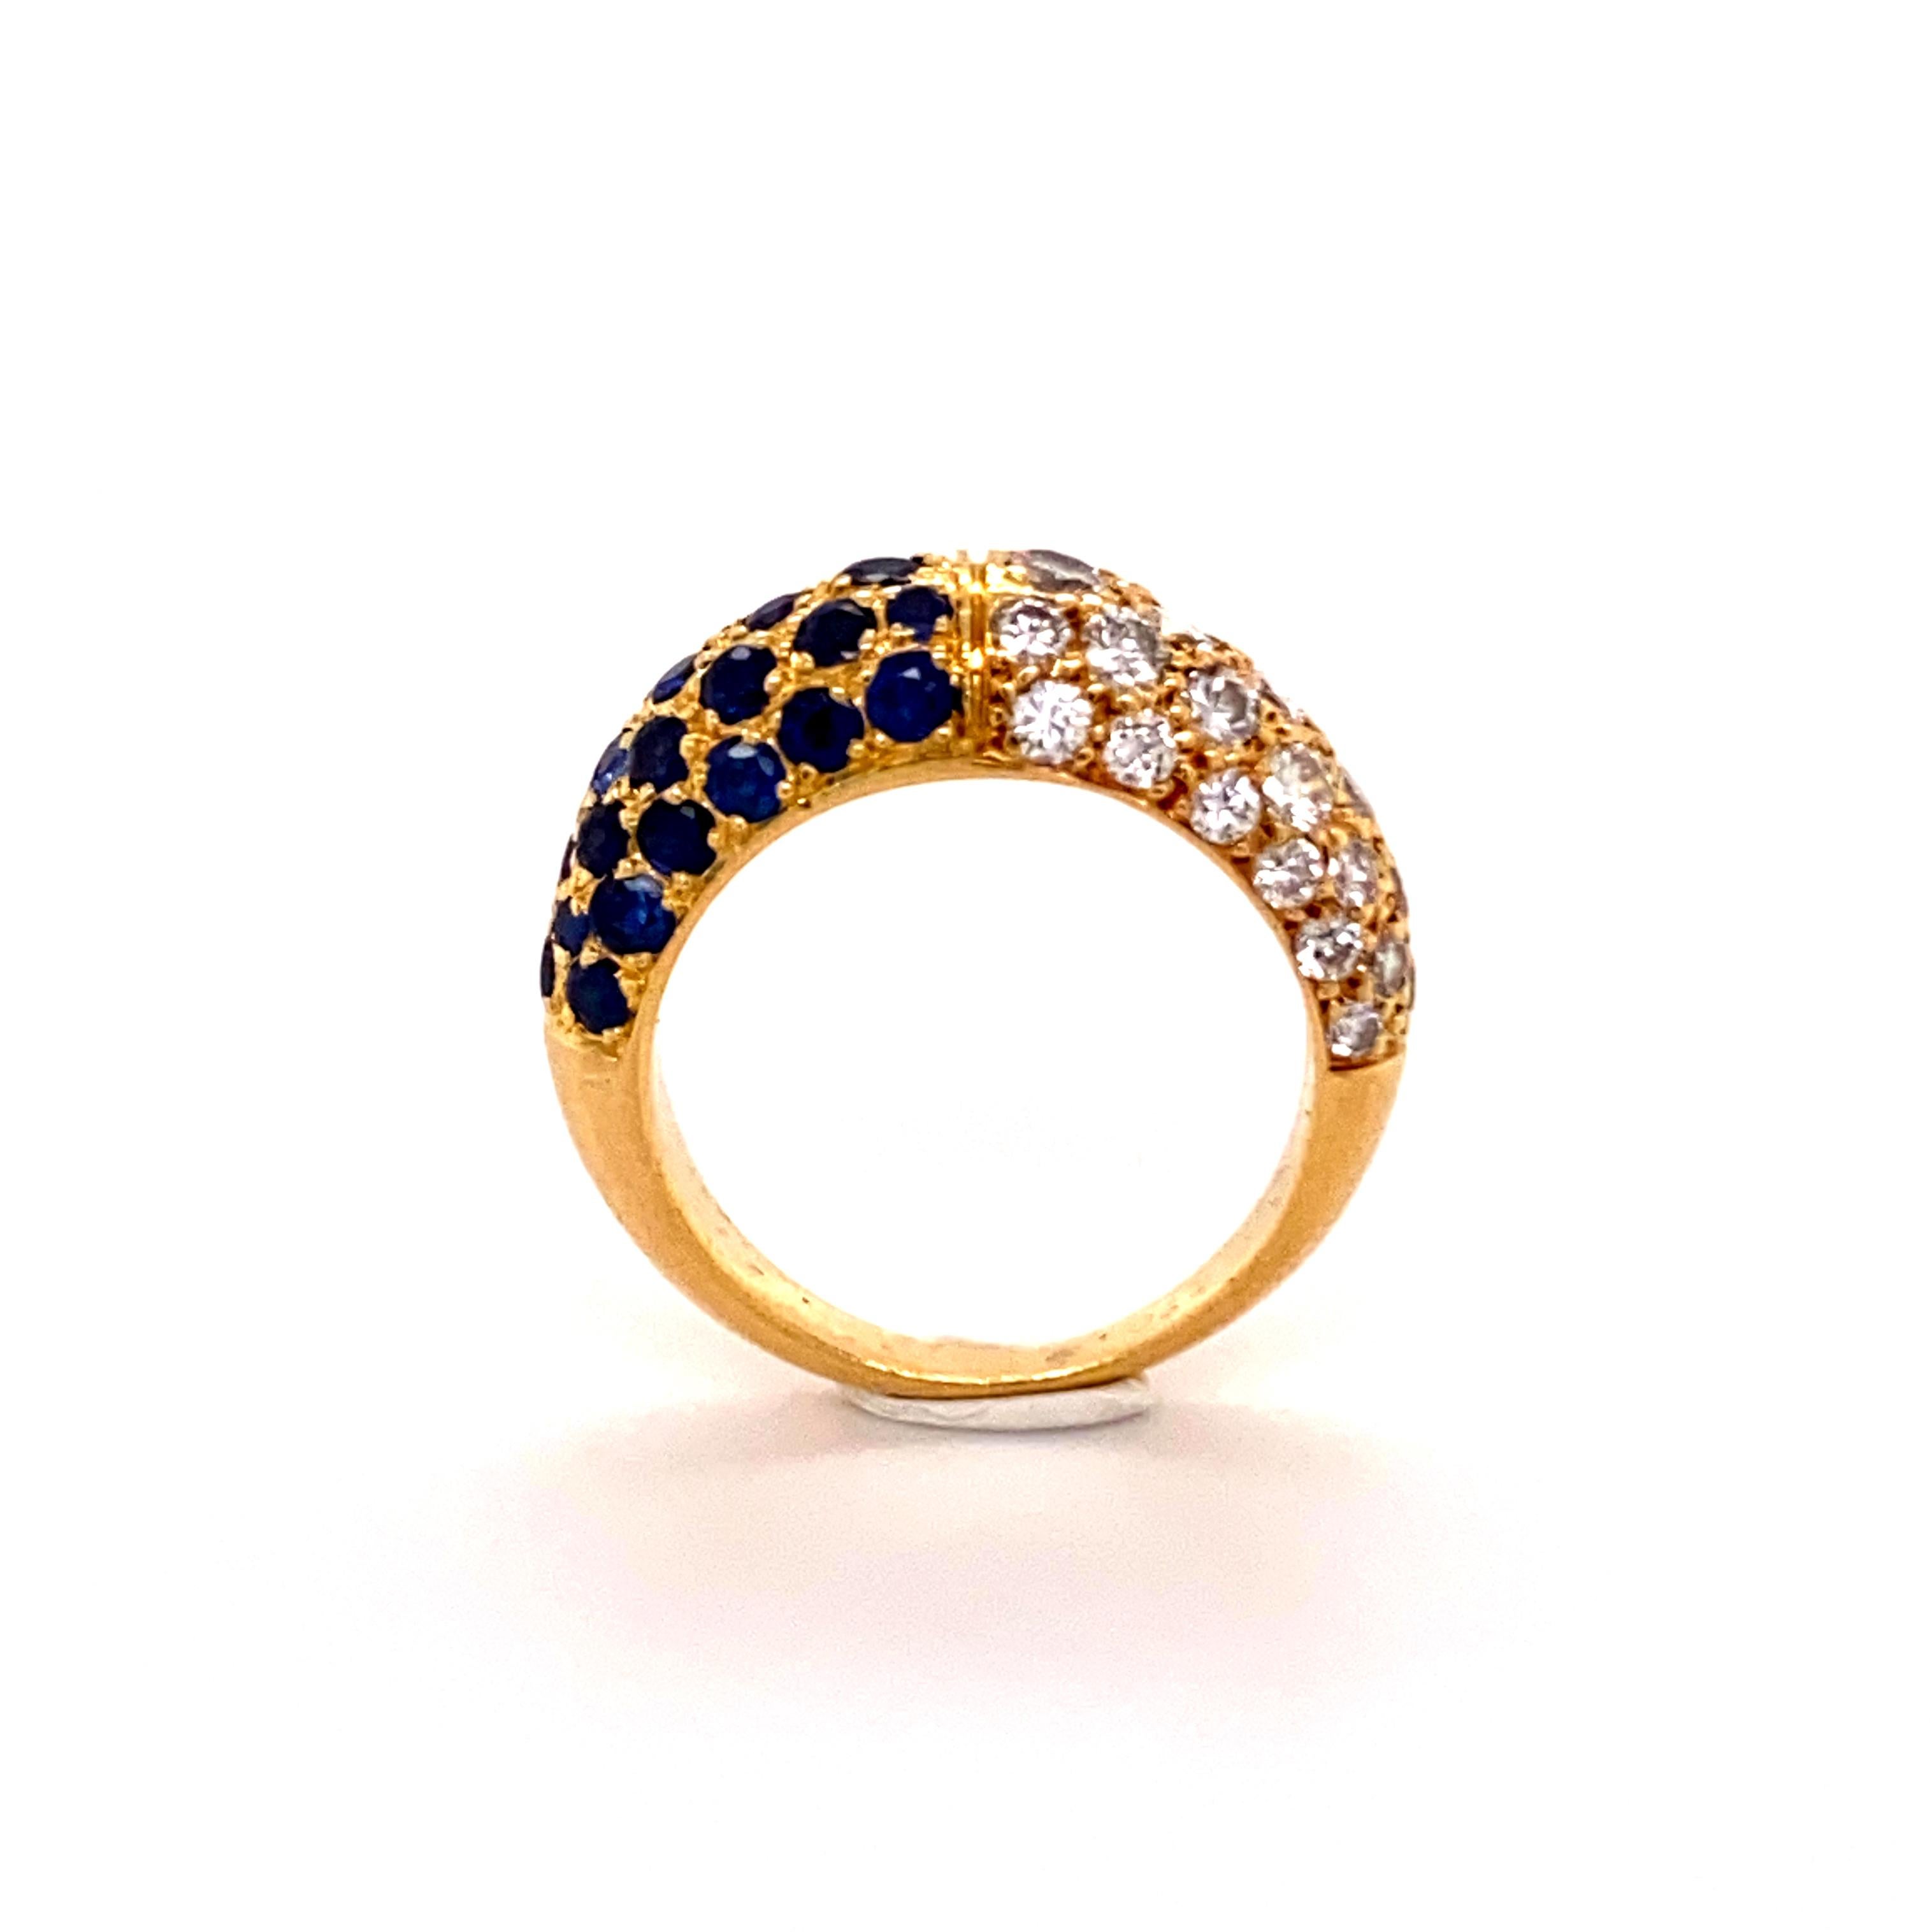 Brilliant Cut Cartier Sapphire and Diamond Ring in 18 Karat Yellow Gold